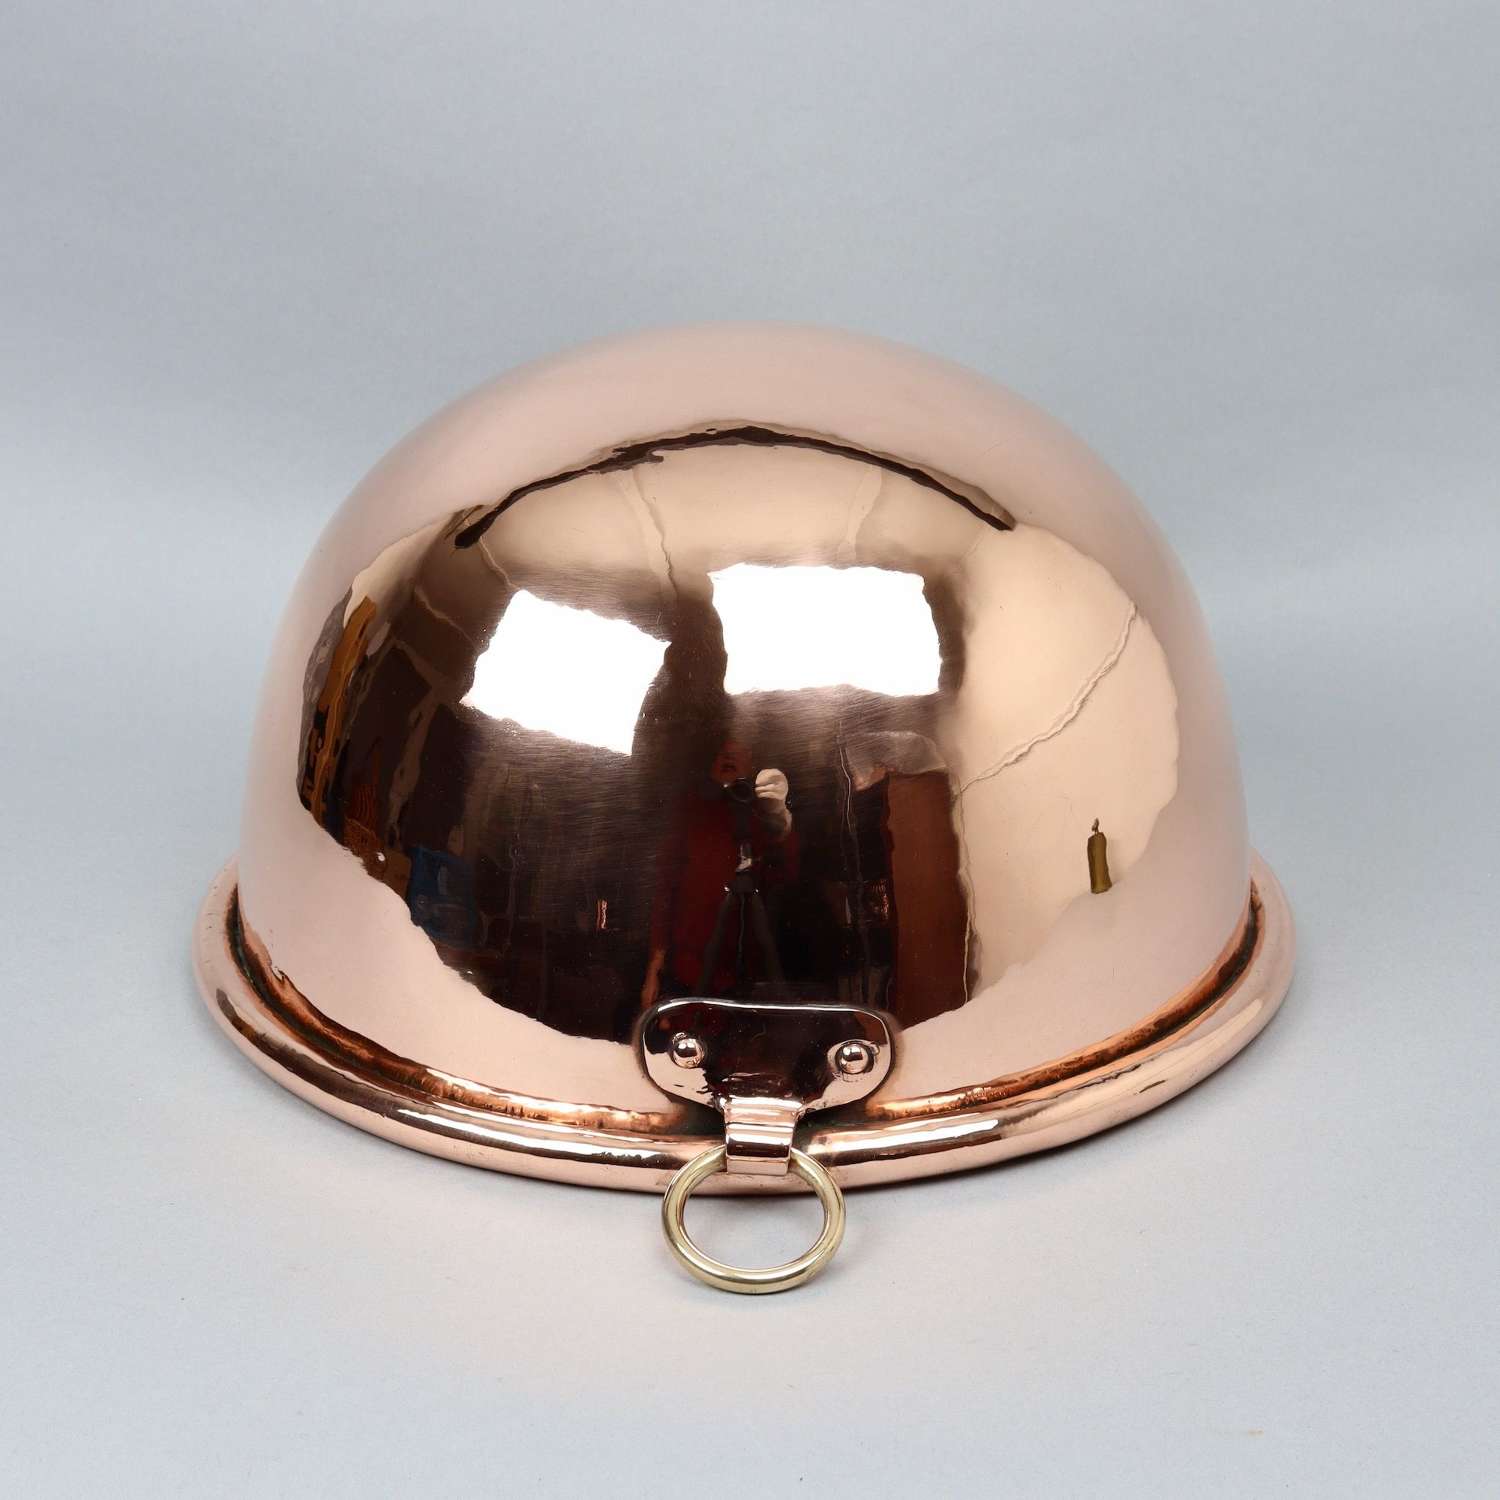 Large, French Copper Egg Bowl